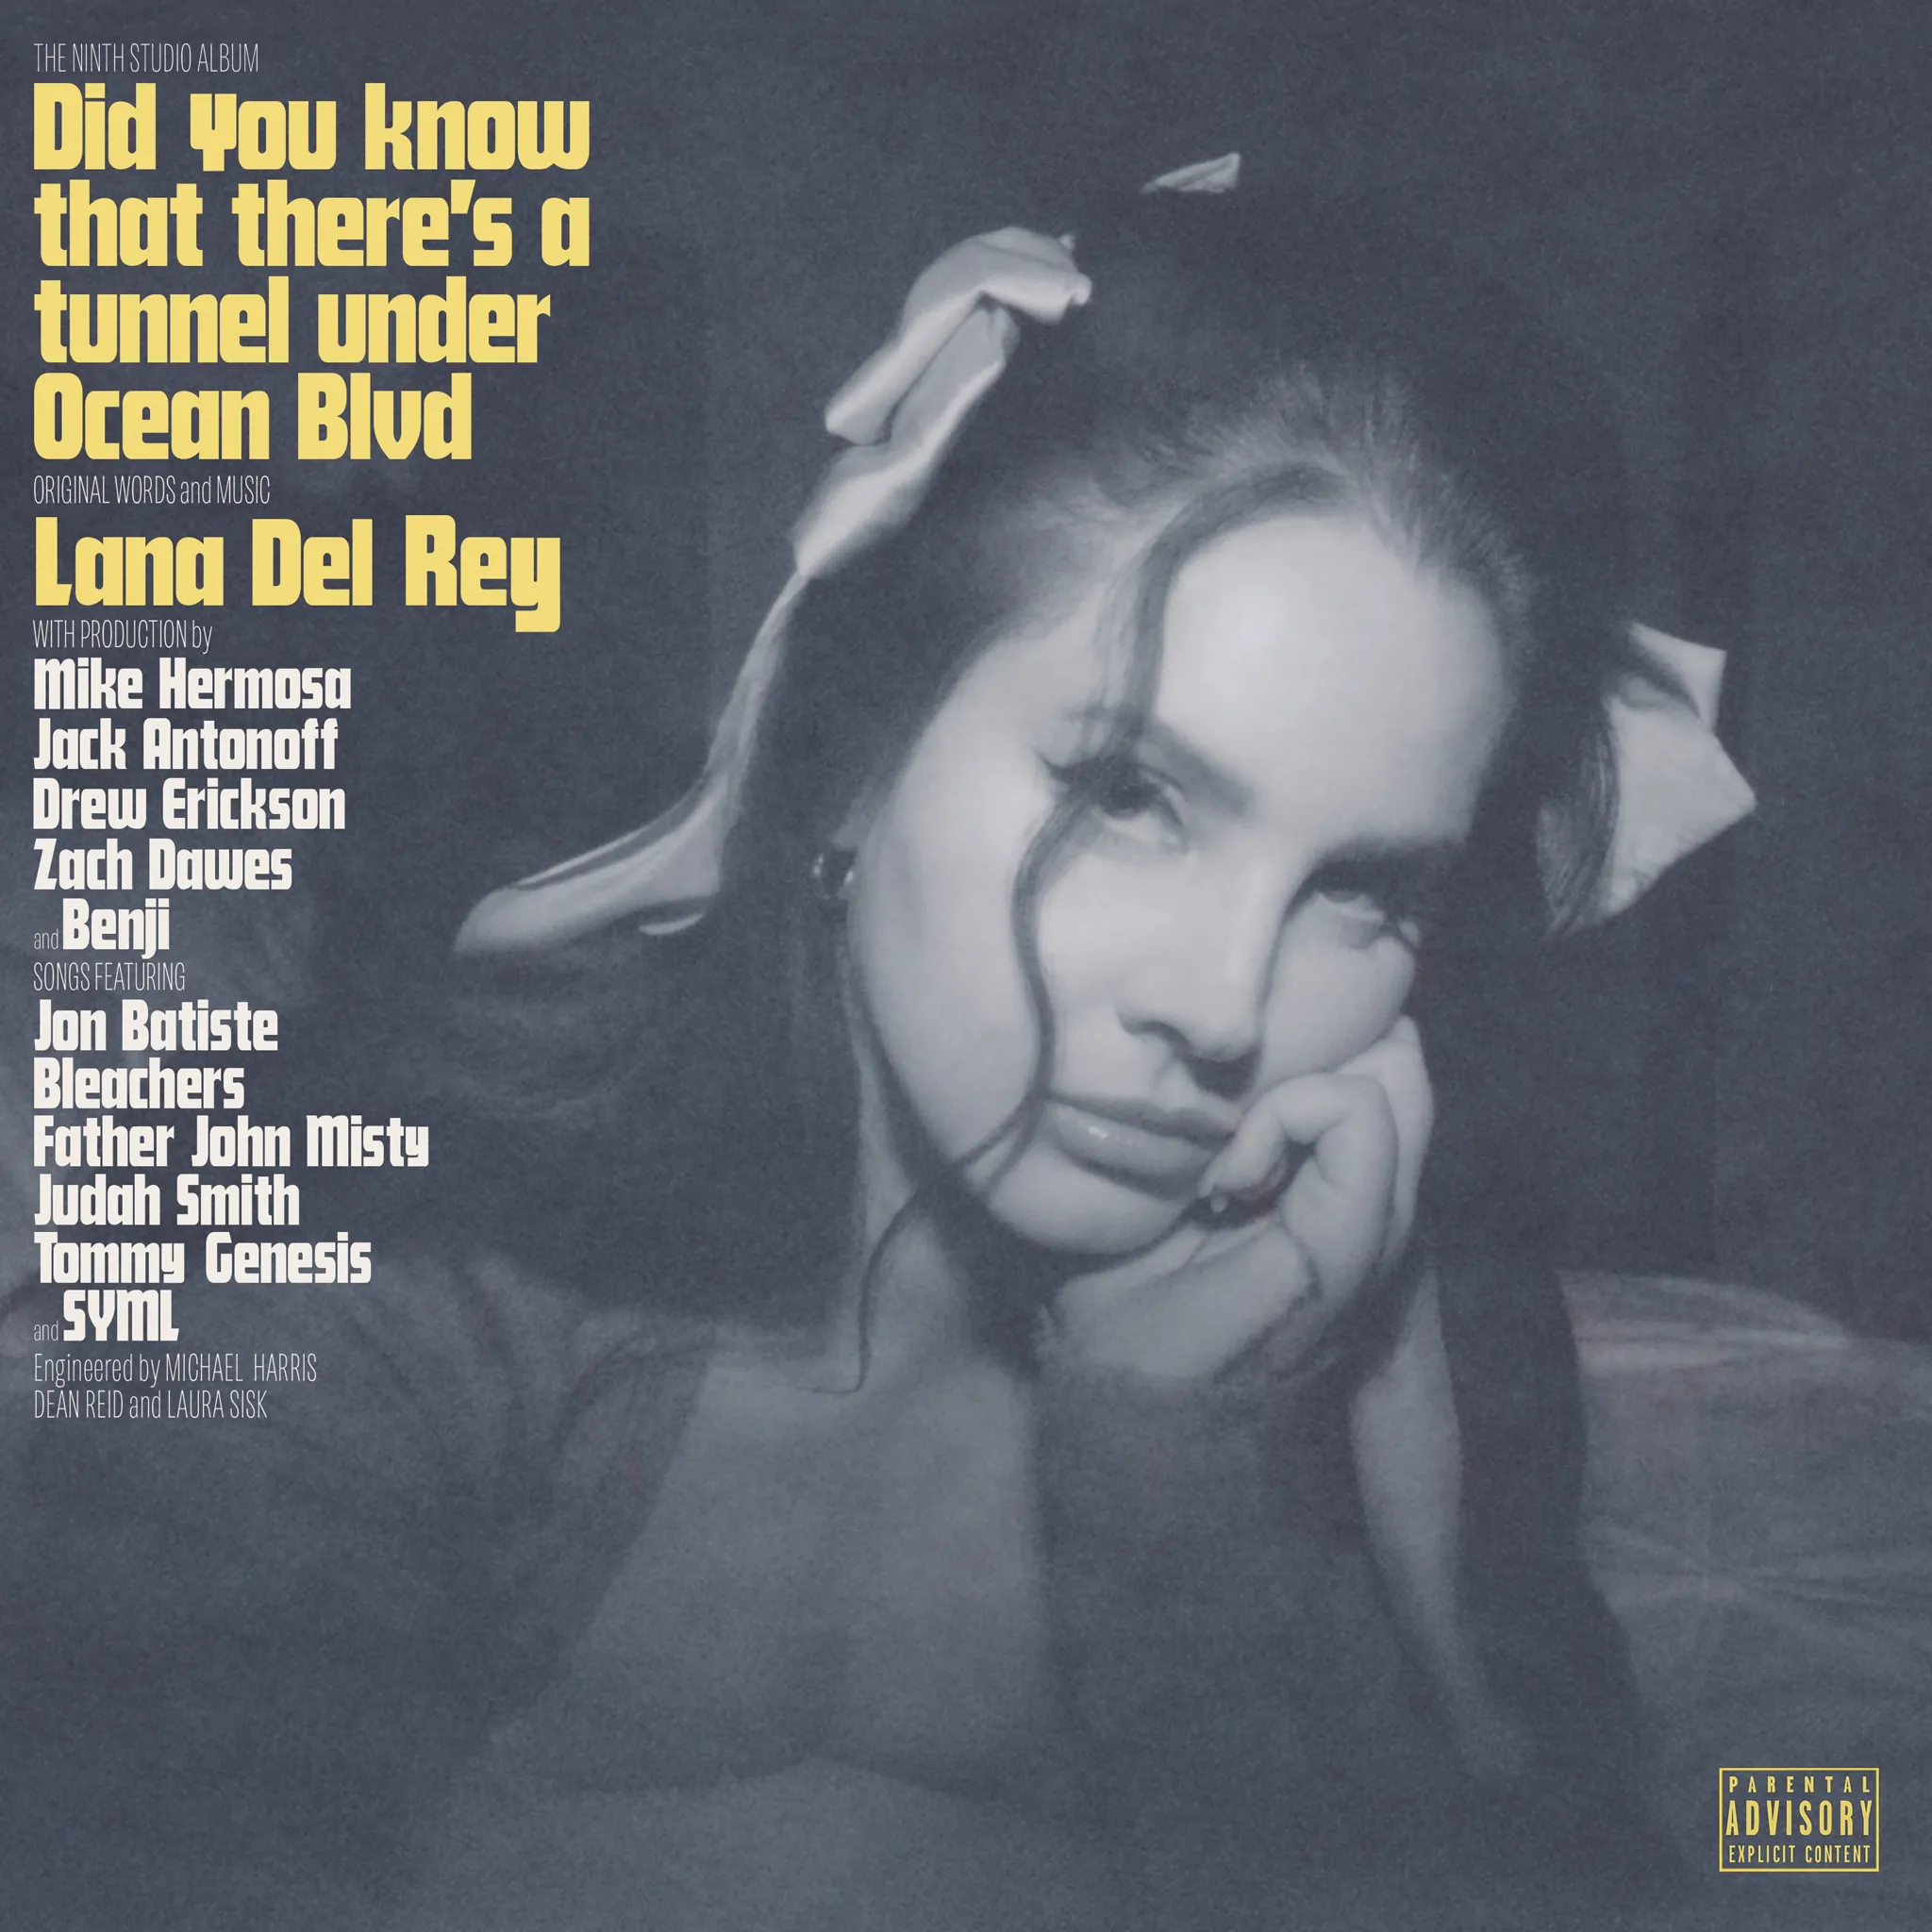 Lana Del Rey - Did you know that there's a tunnel under Ocean Blvd artwork